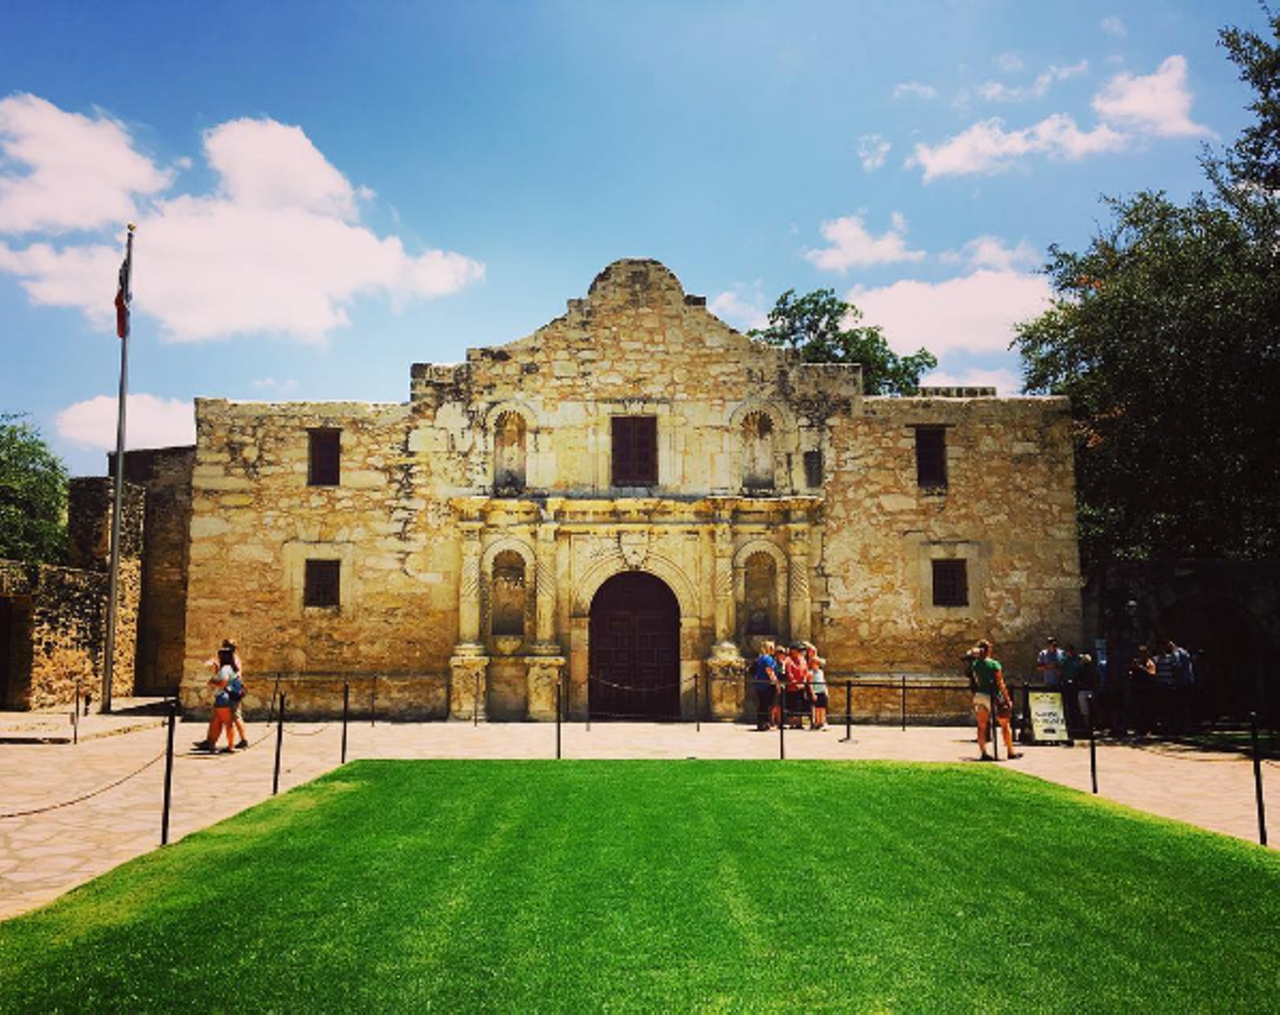 The Alamo
300 Alamo Plaza, (210) 225-1391,  thealamo.org
Who could forget their first trip the Alamo? If you haven&#146;t visited the mission and battle field since your childhood years, think of it as your duty as a San Antonian to make the trip soon.
Photo via Instagram, lsh826